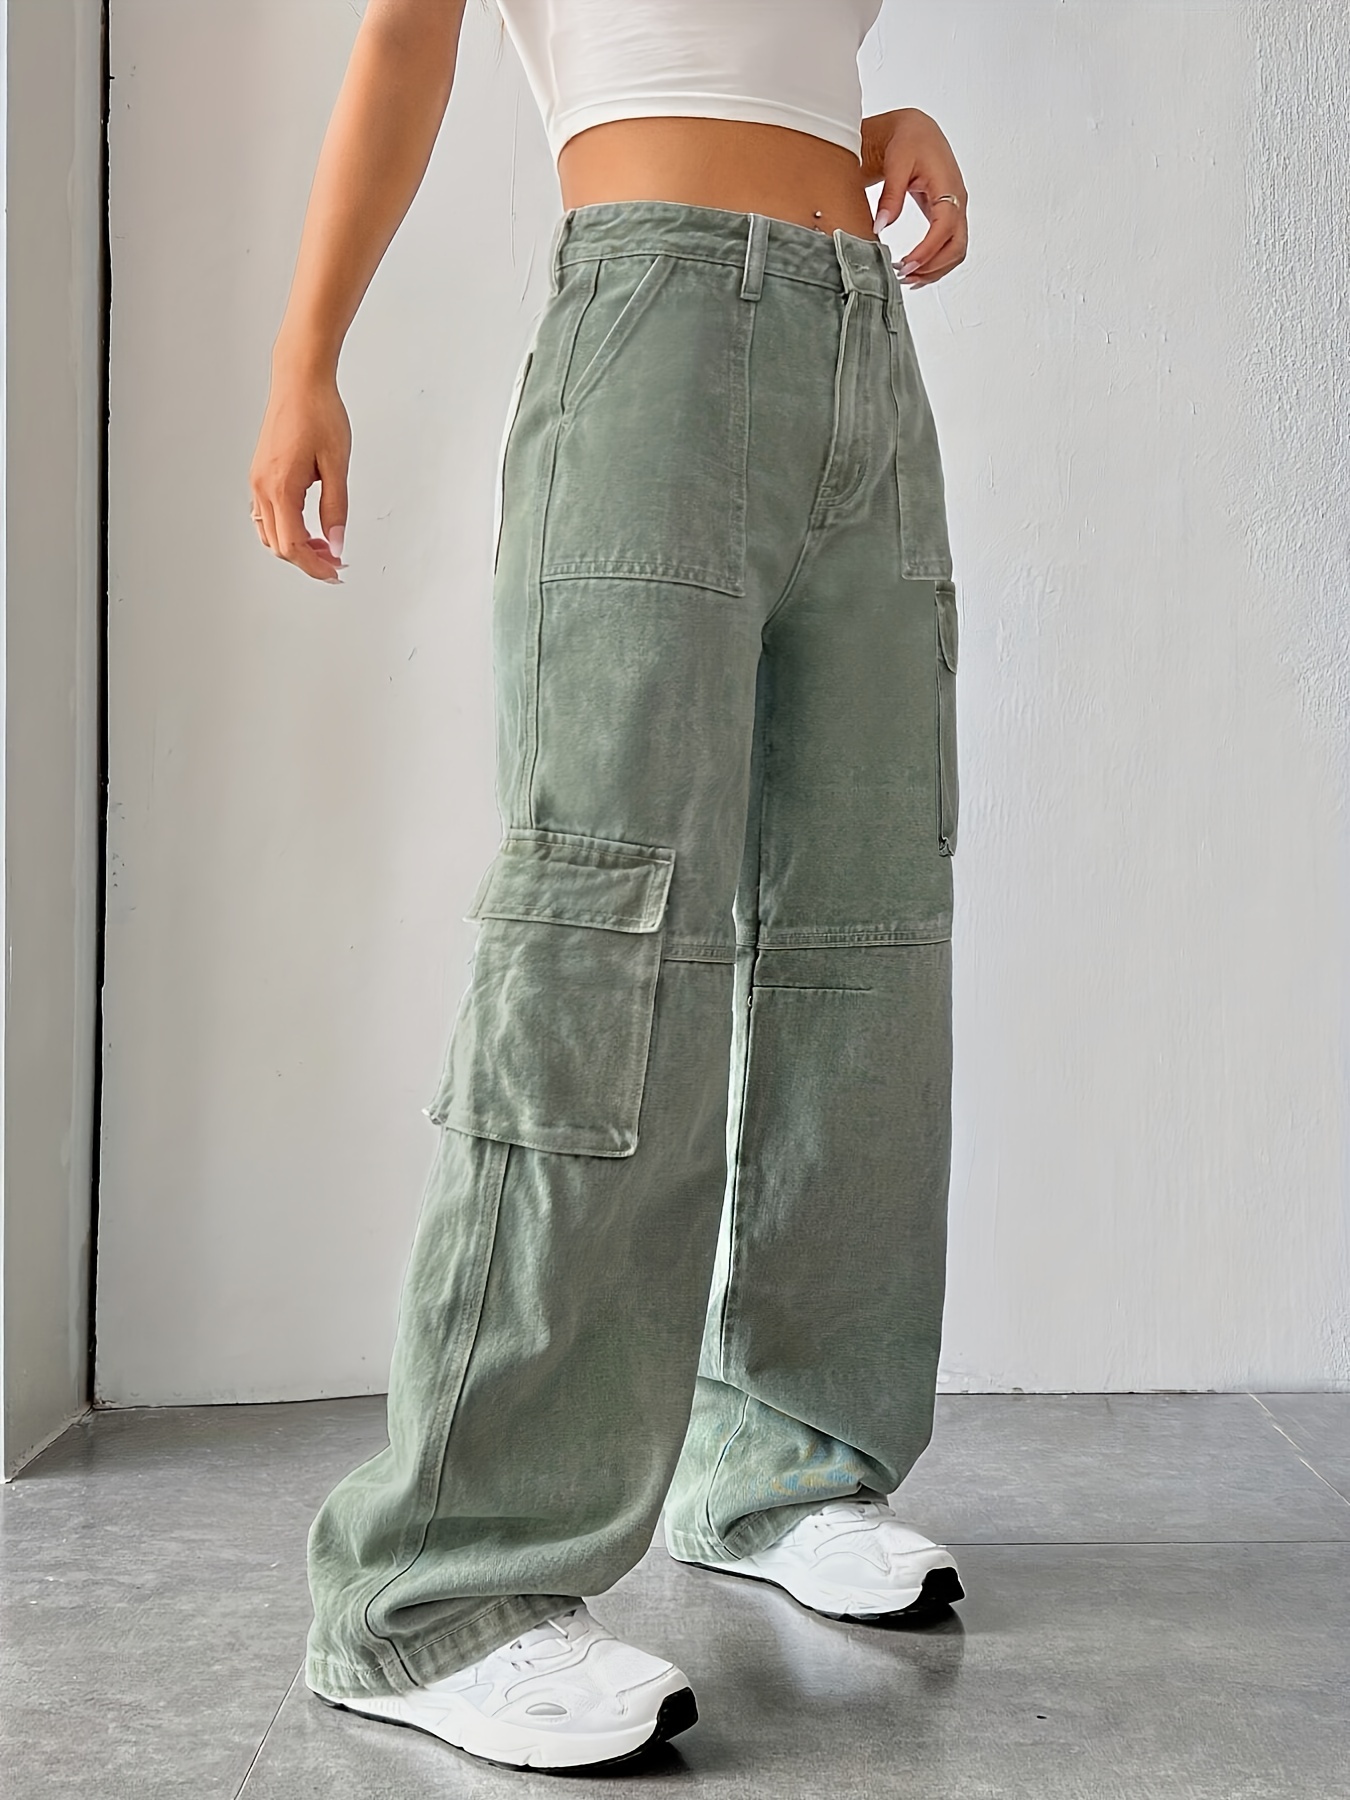 Cargo Jeans Baggy Jeans for Women Y2k Cargo Jeans Cargo Pants for